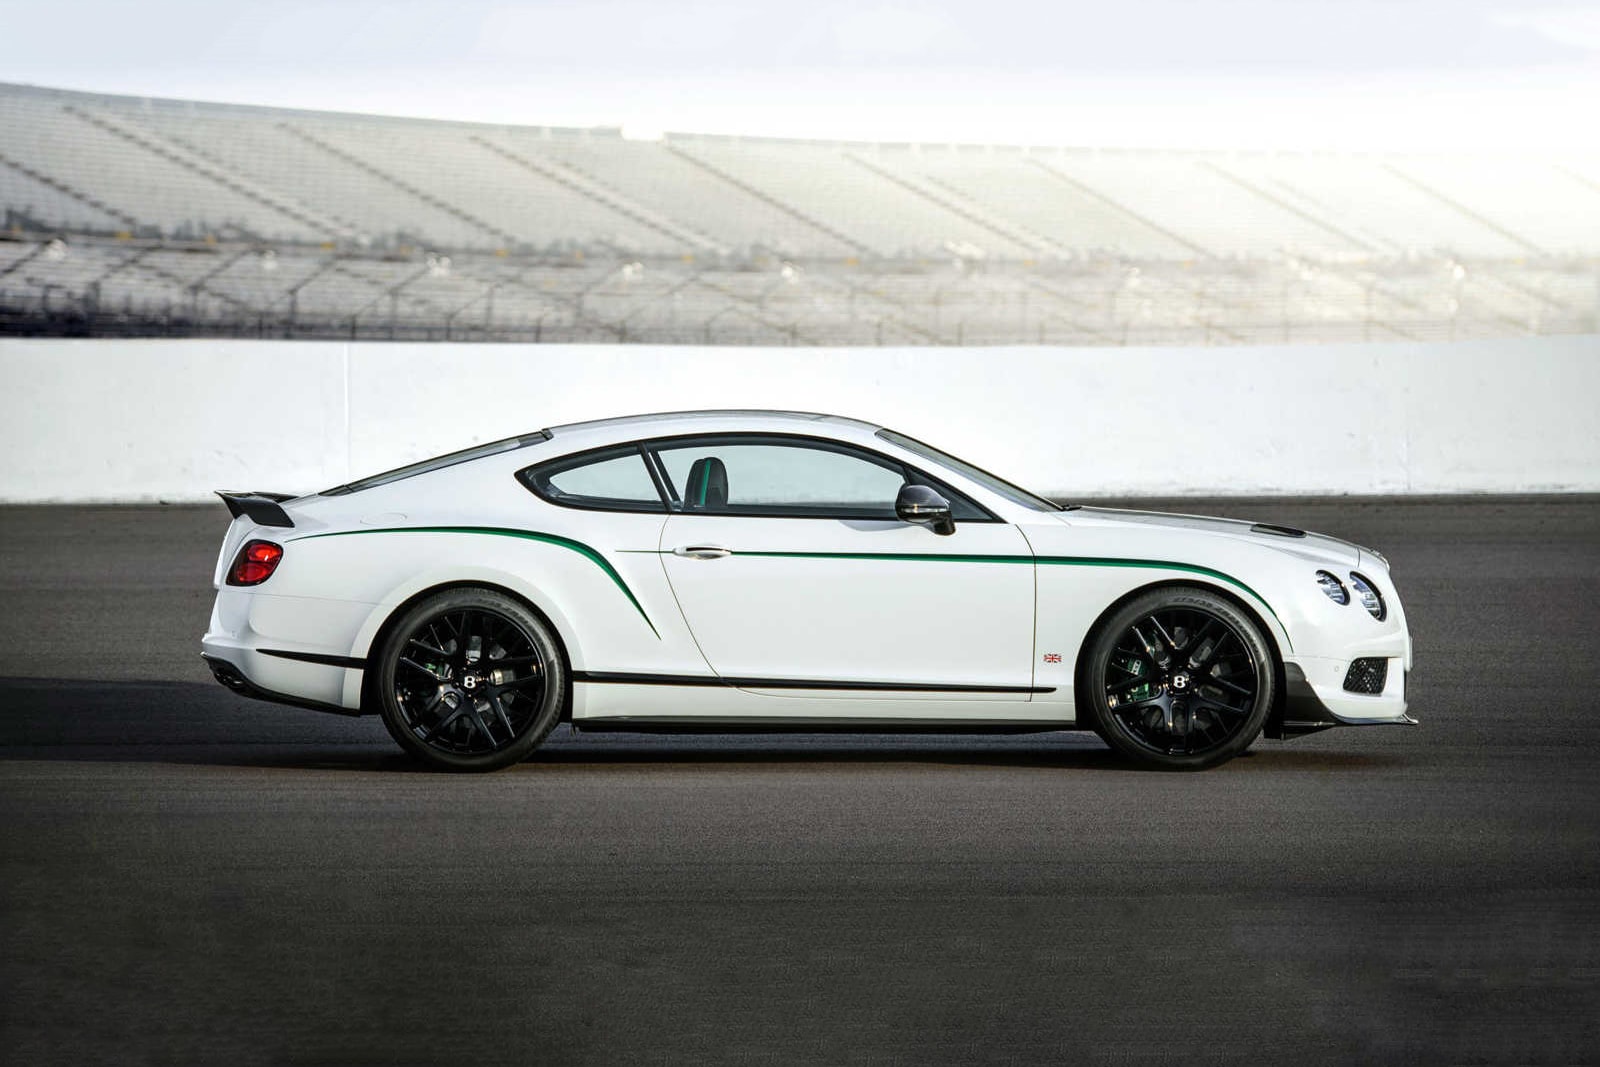 Bentley Continental GT3 R For Sale Auction Rare White Green Racing Supercar Luxury Car Whips Cars Limited Edition